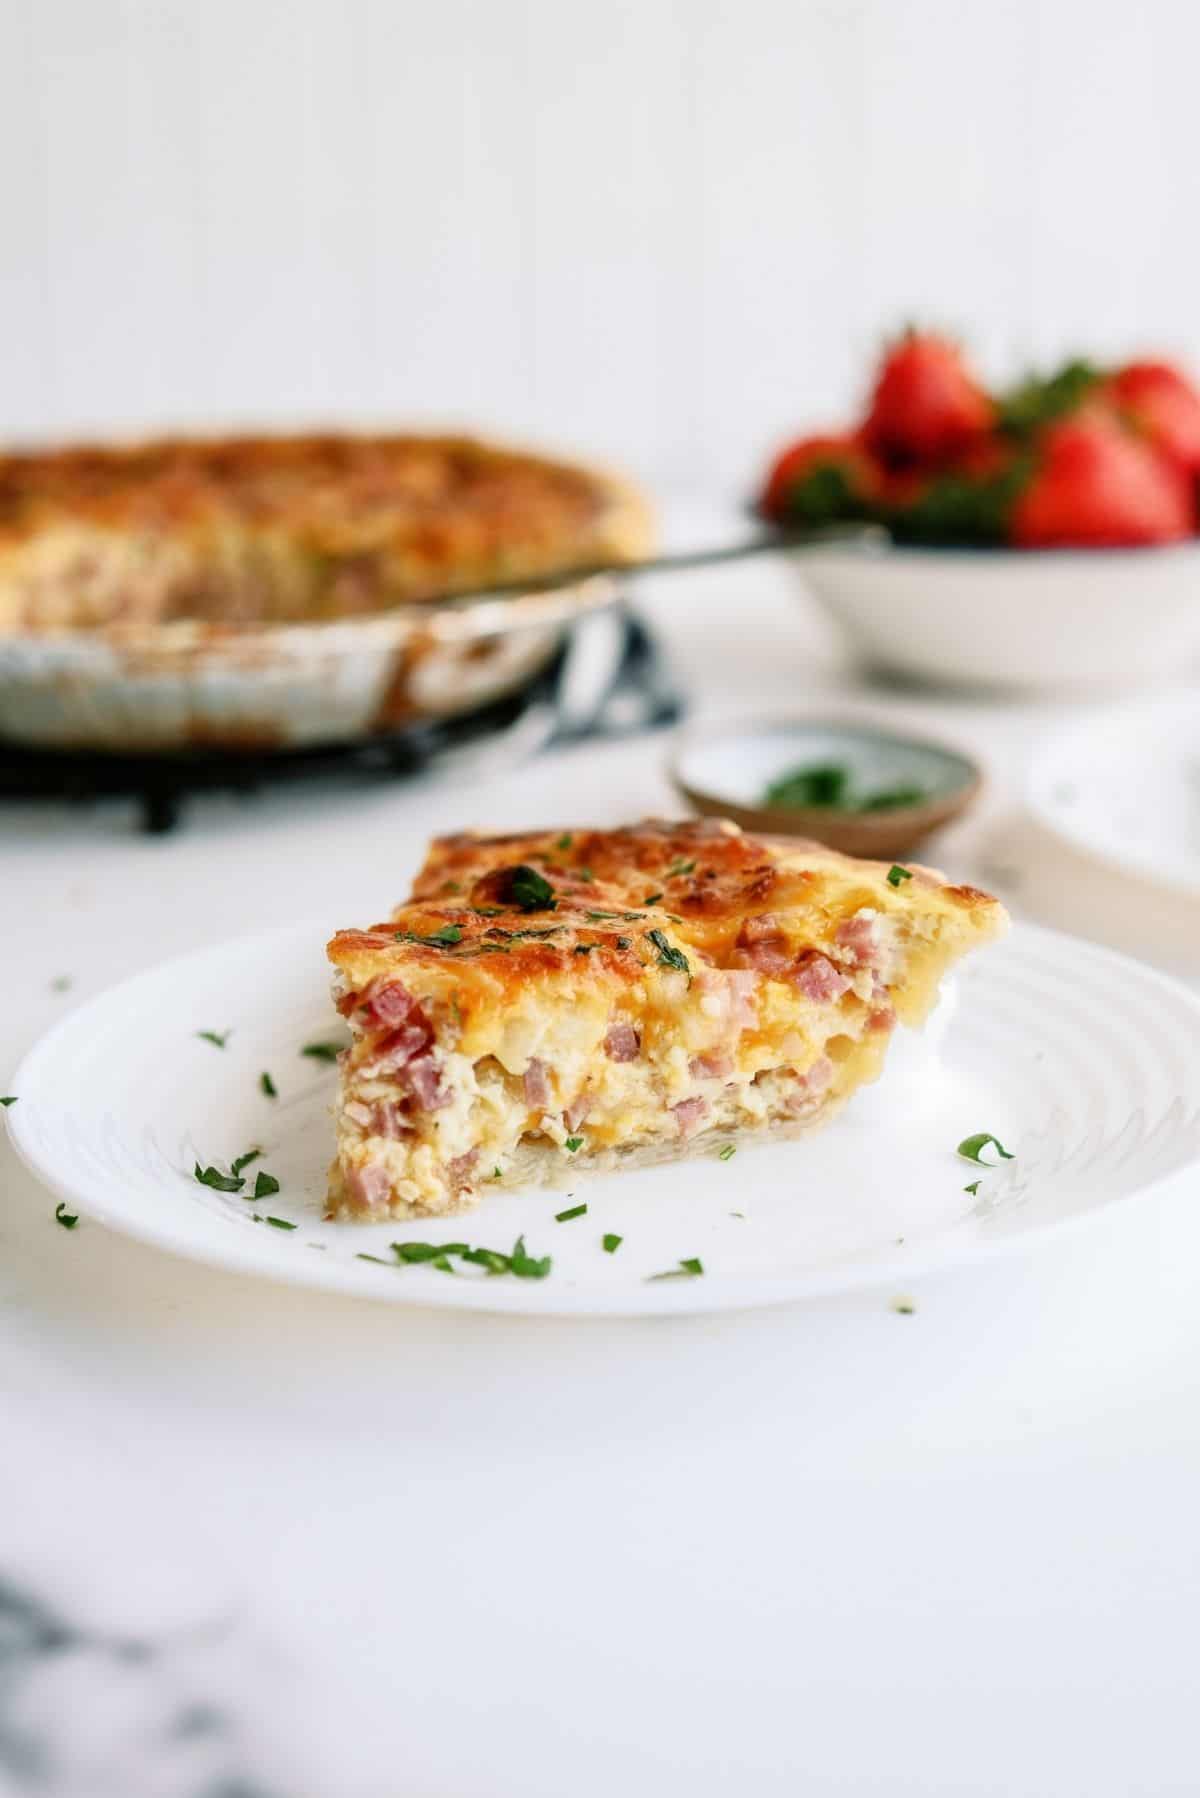 https://www.sixsistersstuff.com/wp-content/uploads/2022/03/Easy-Ham-and-Cheese-Quiche-1.jpg